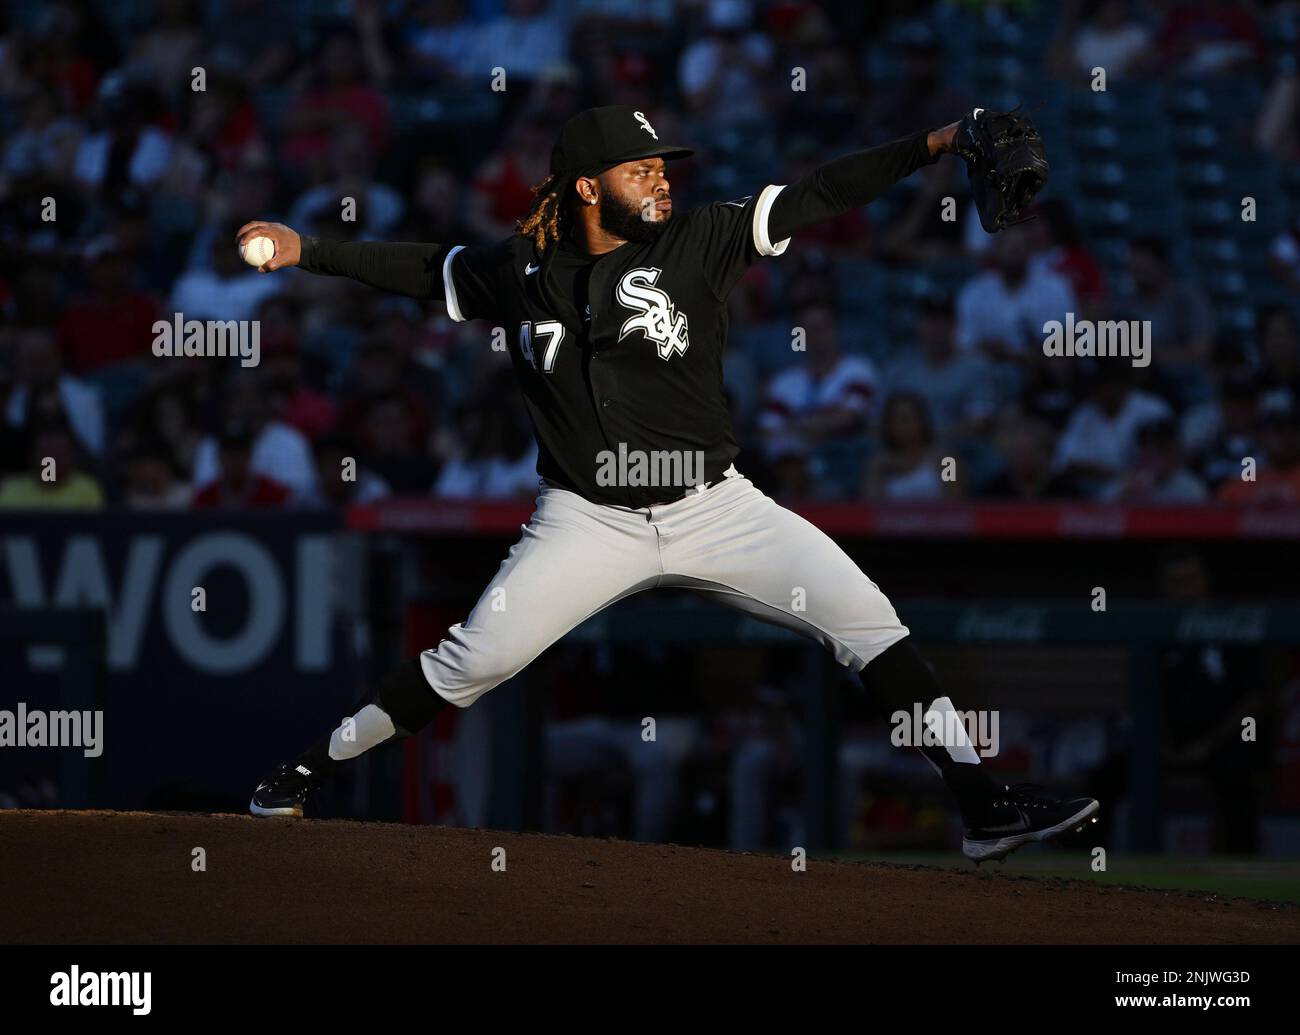 ANAHEIM, CA - JUNE 28: Chicago White Sox pitcher Johnny Cueto (47) pitching  in the second inning of an MLB baseball game against the Los Angeles Angels  played on June 28, 2022